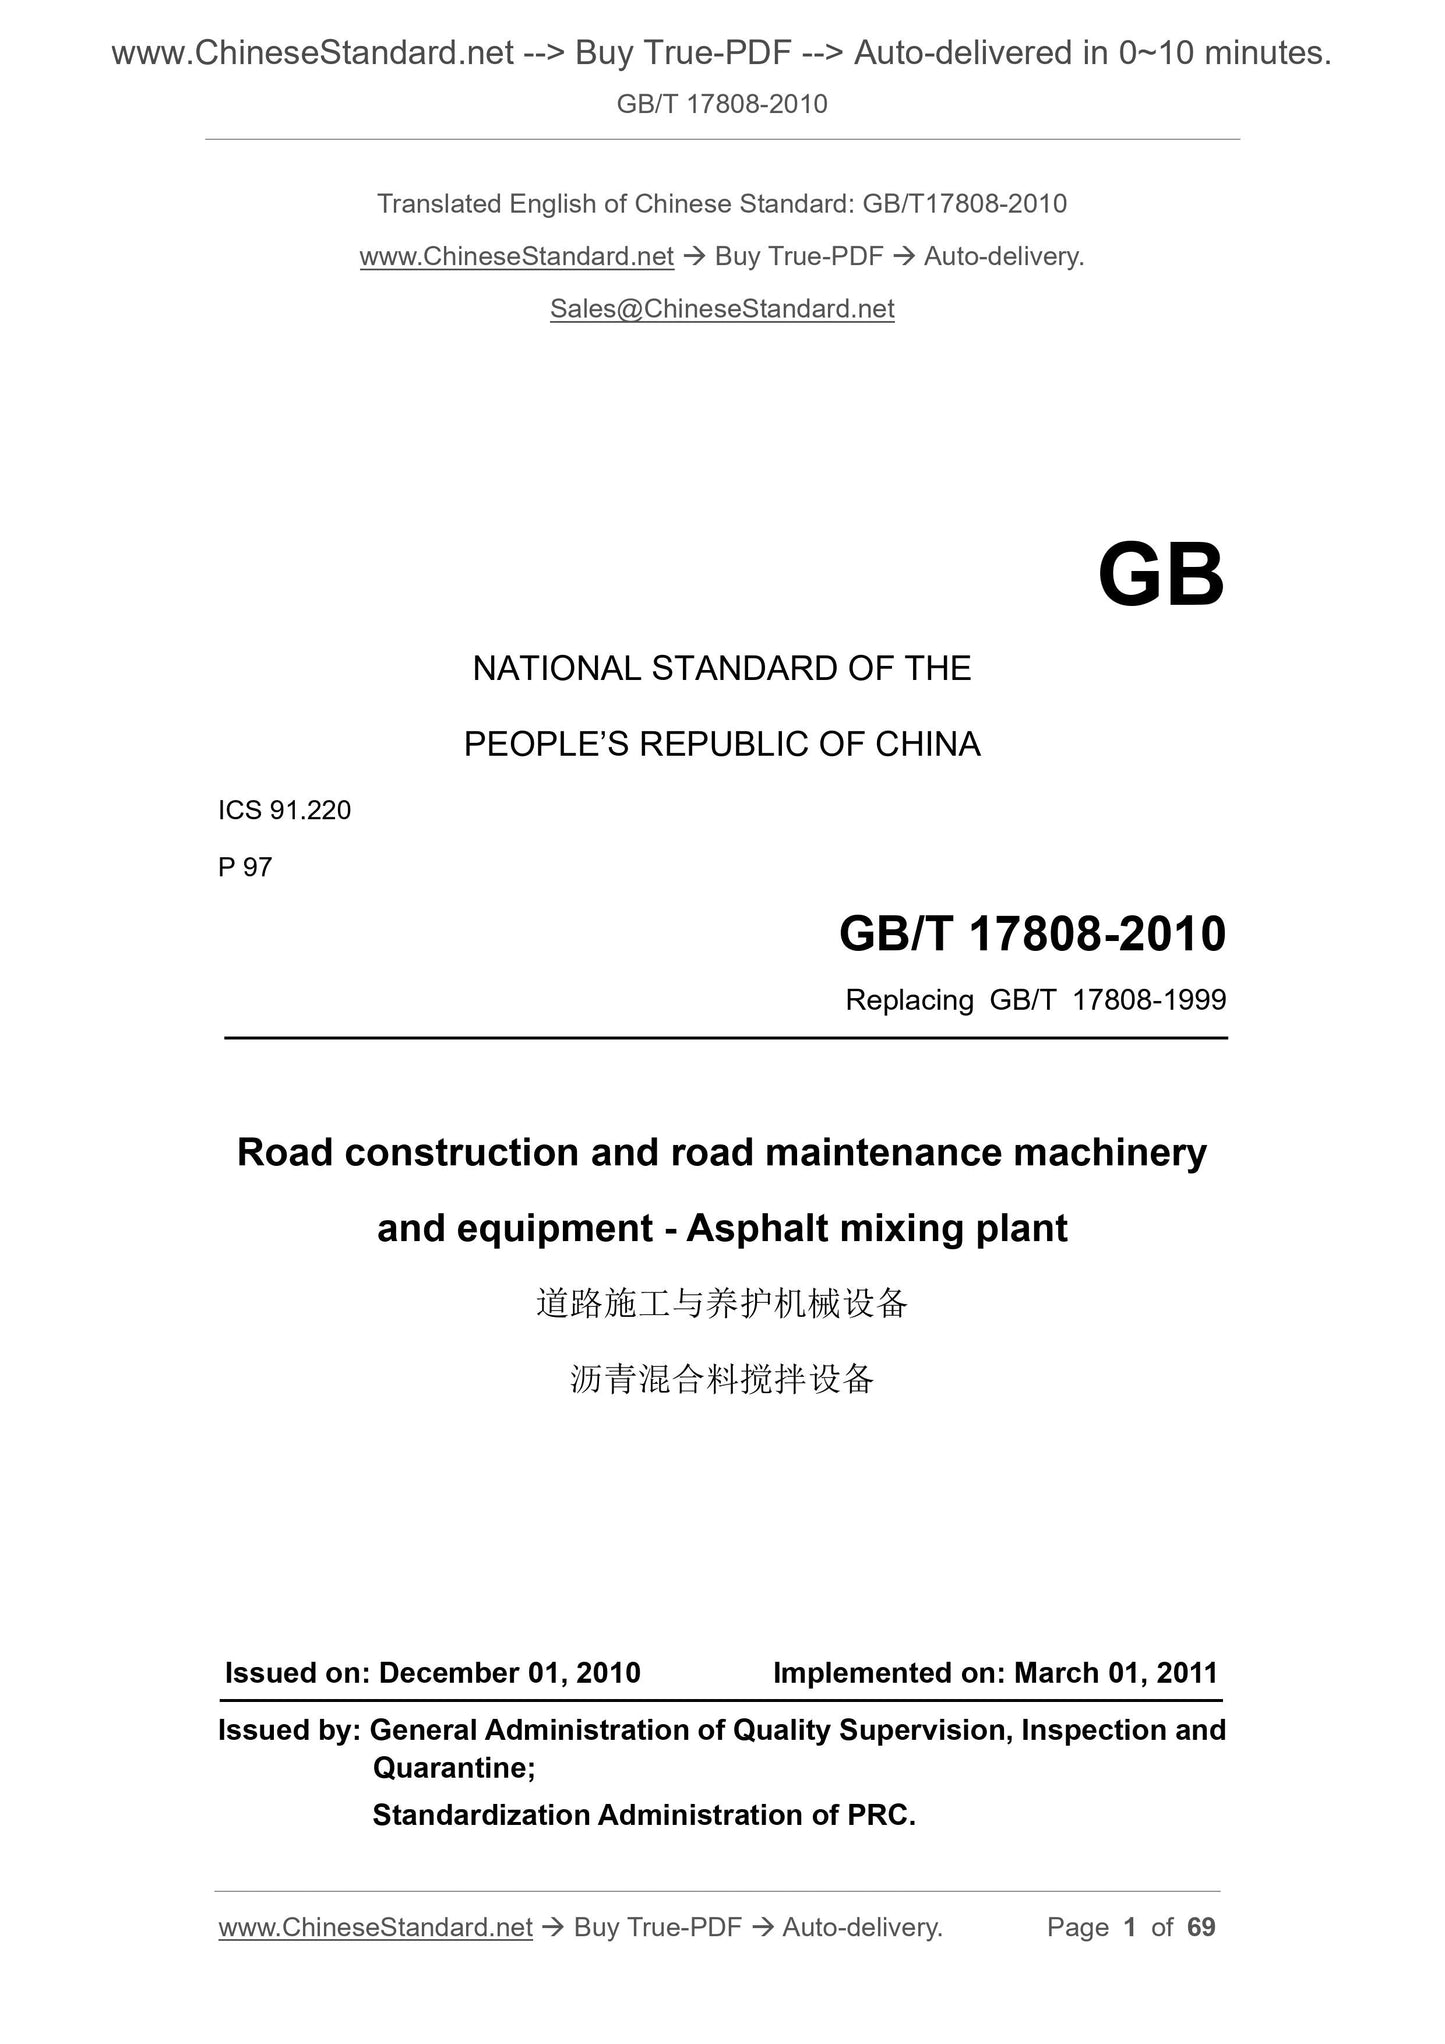 GB/T 17808-2010 Page 1